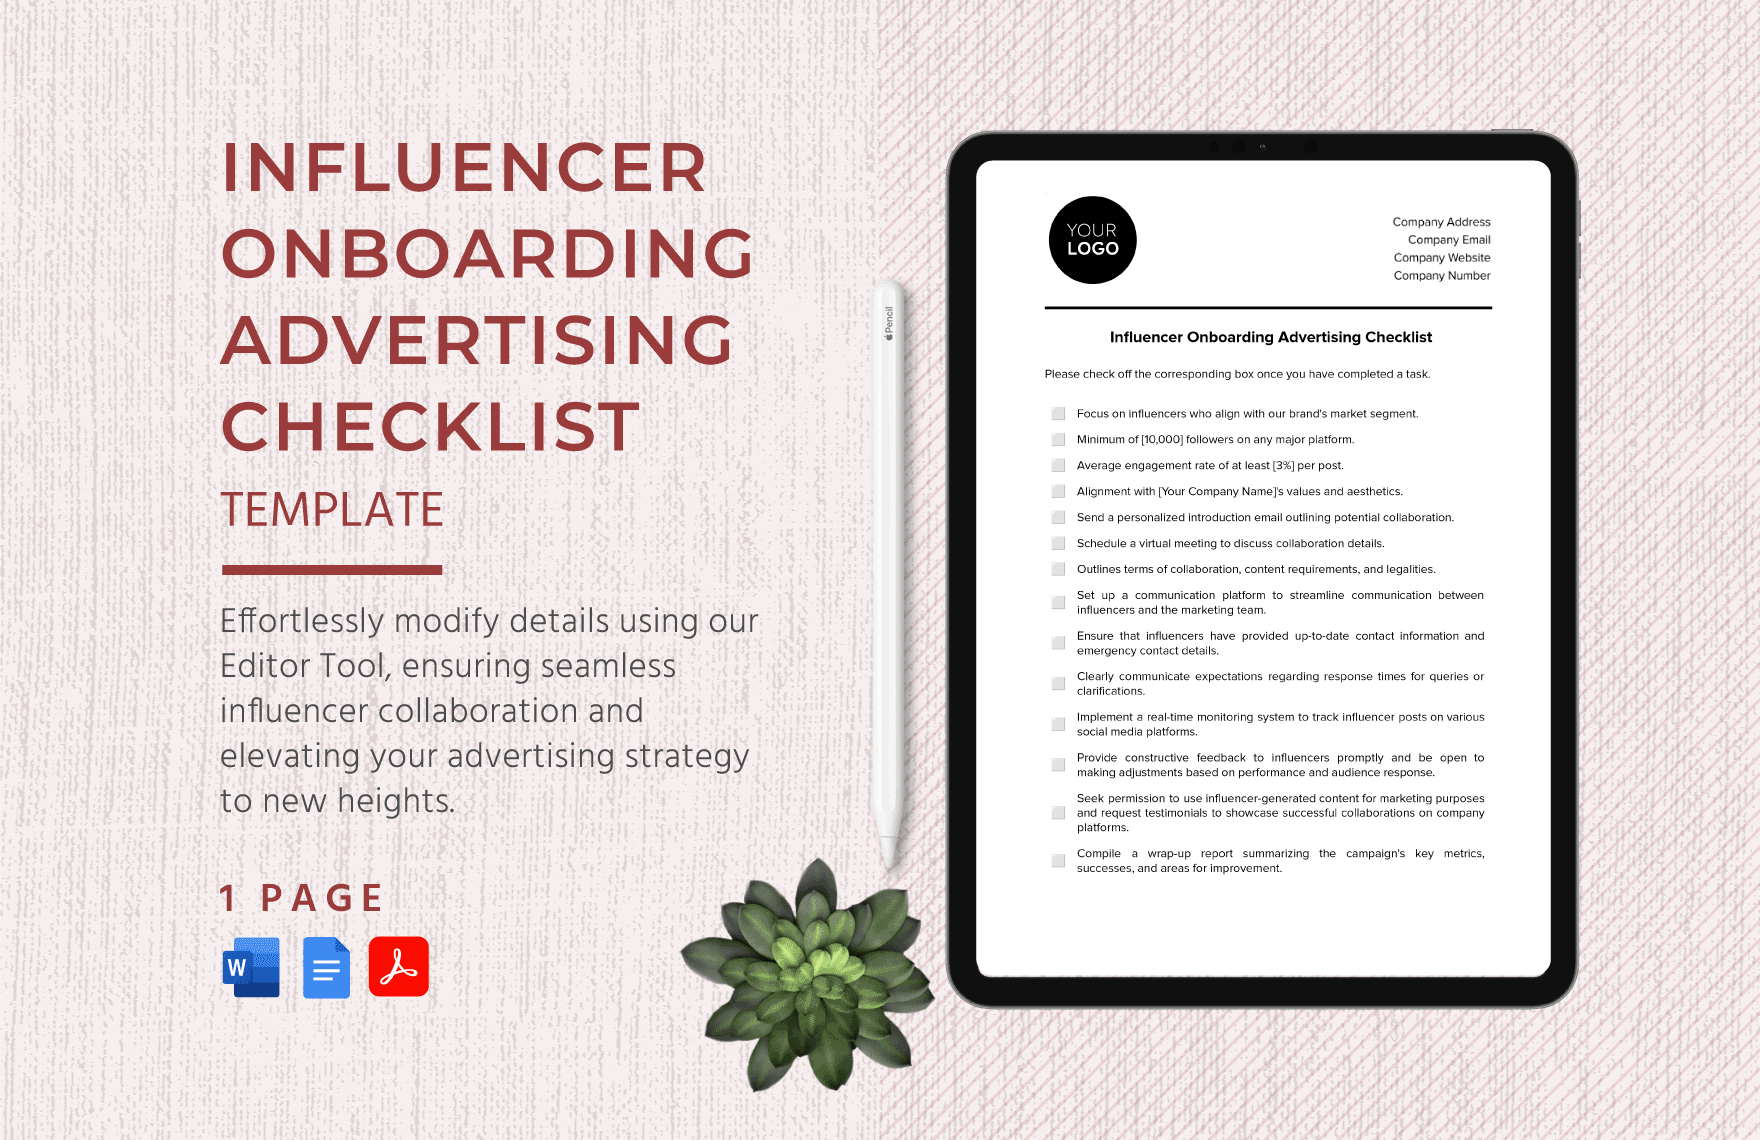 Influencer Onboarding Advertising Checklist Template